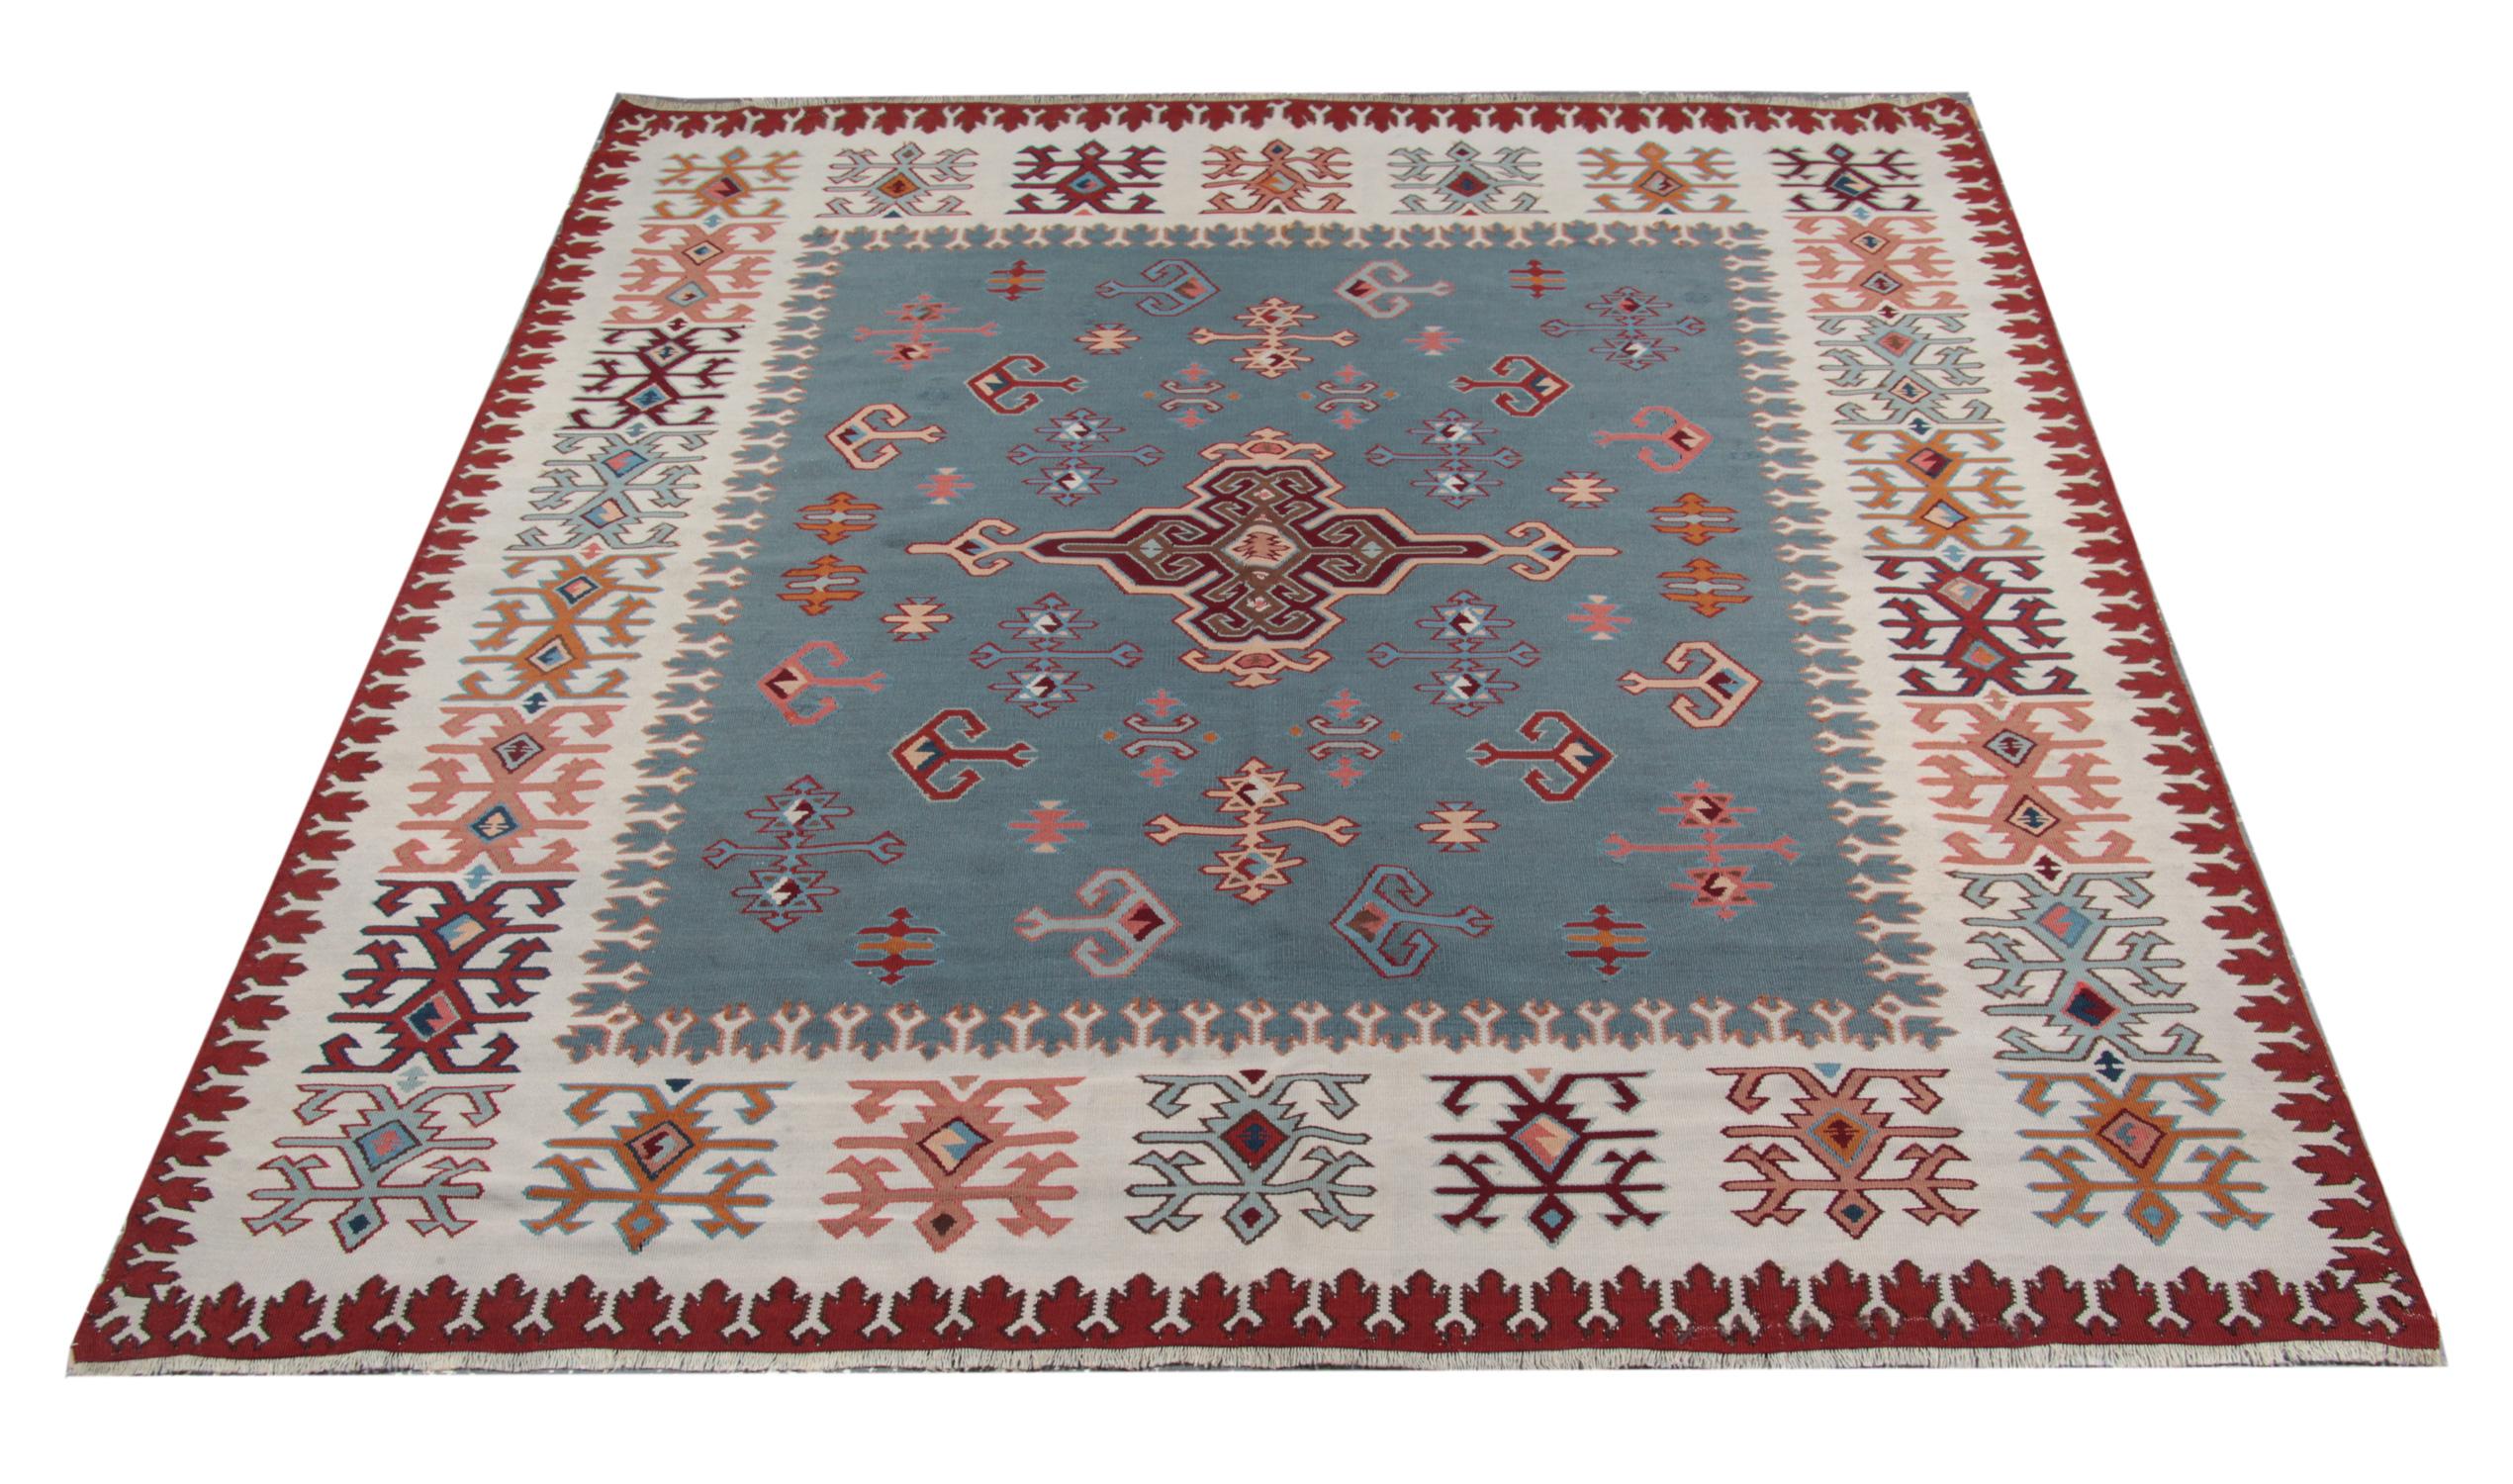 This handmade carpet oriental rug Pirot Kelim is an excellent example of Eastern European handwoven and flat-weave tapestry rugs, traditionally produced in Pirot, a town in southeastern Serbia. The yarns are all handspun and had been dyed by organic